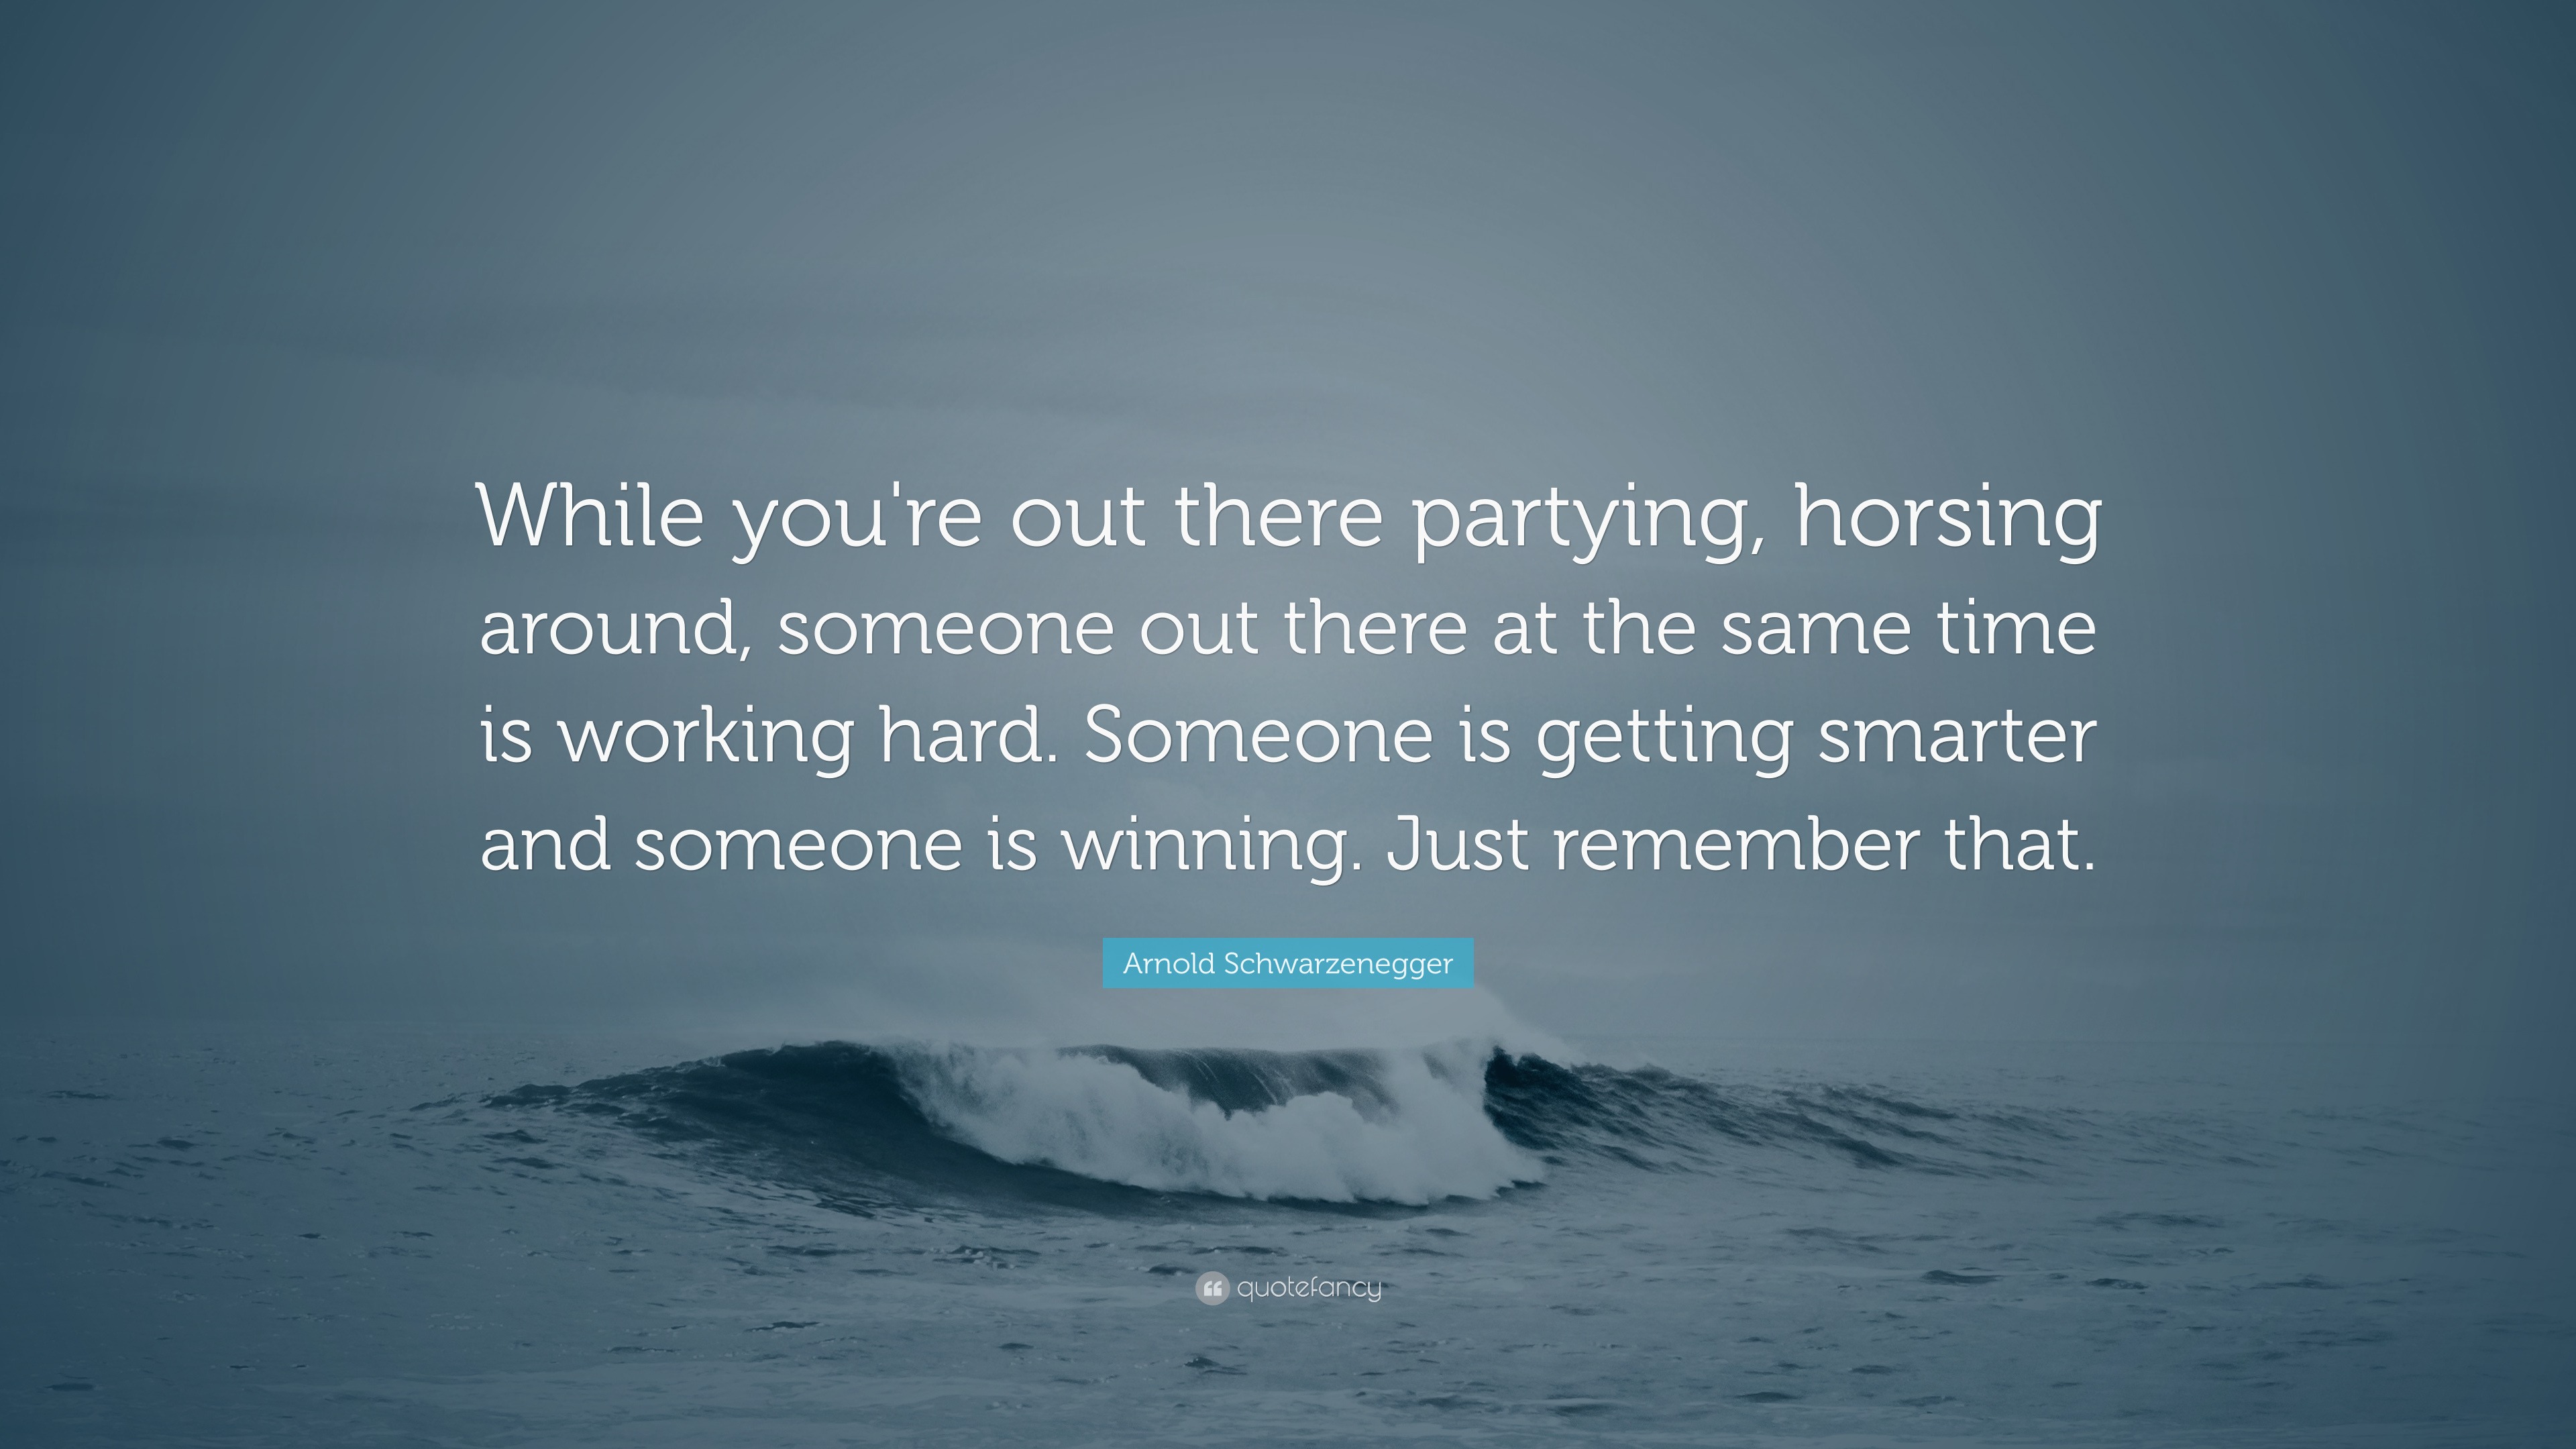 Arnold Schwarzenegger Quote: “While you're out there partying ...